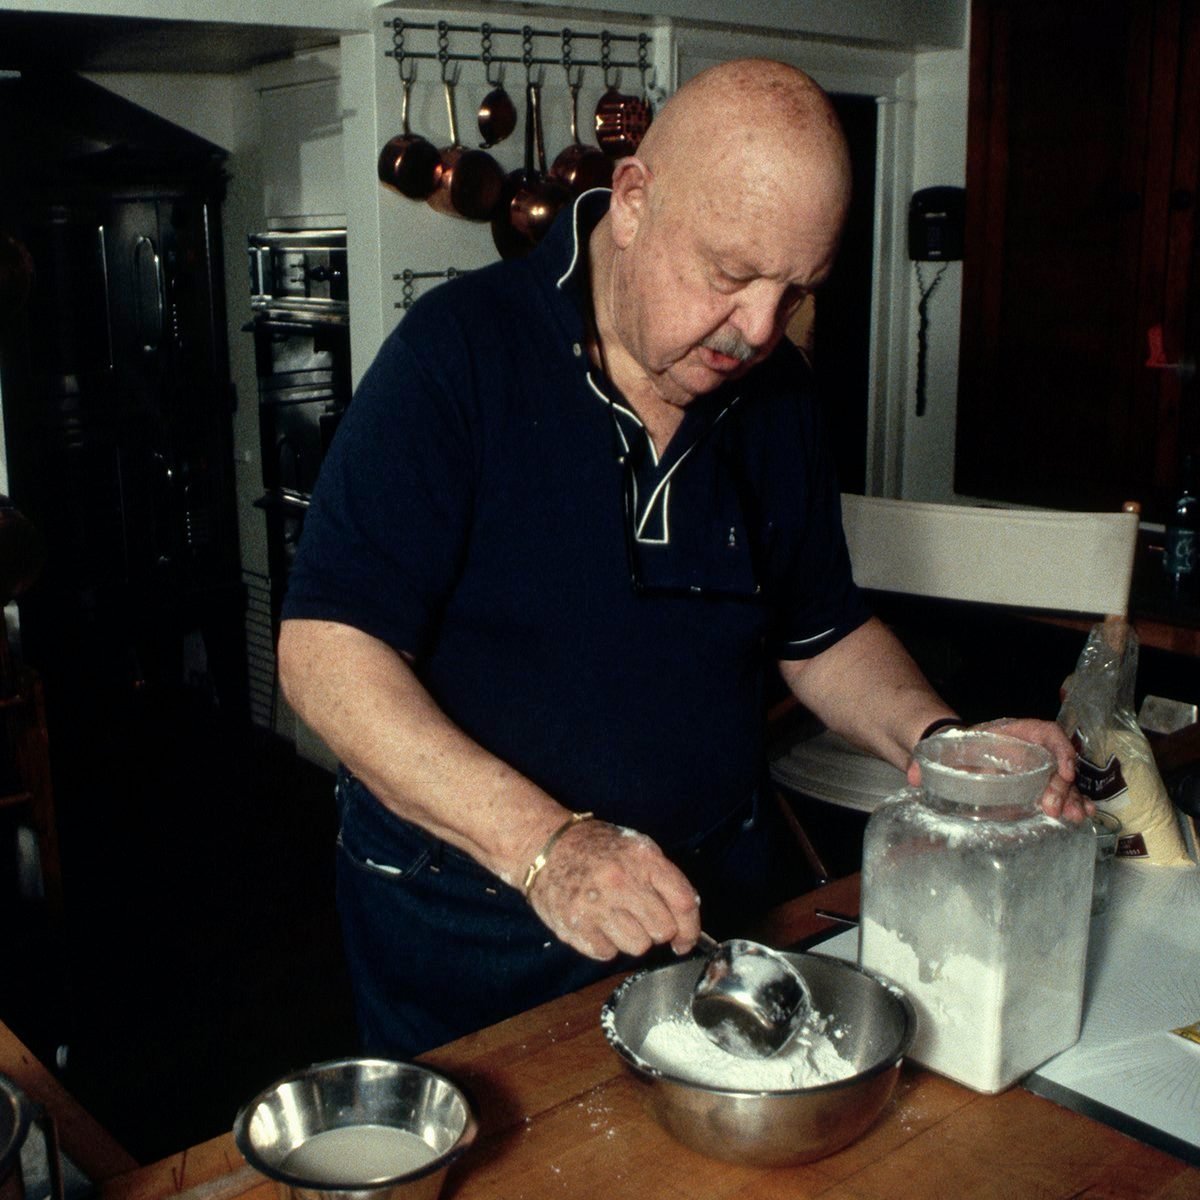 James Beard, a famous food critic, prepares a meal in his kitchen at home. (Photo by �� Jacques M. Chenet/CORBIS/Corbis via Getty Images)